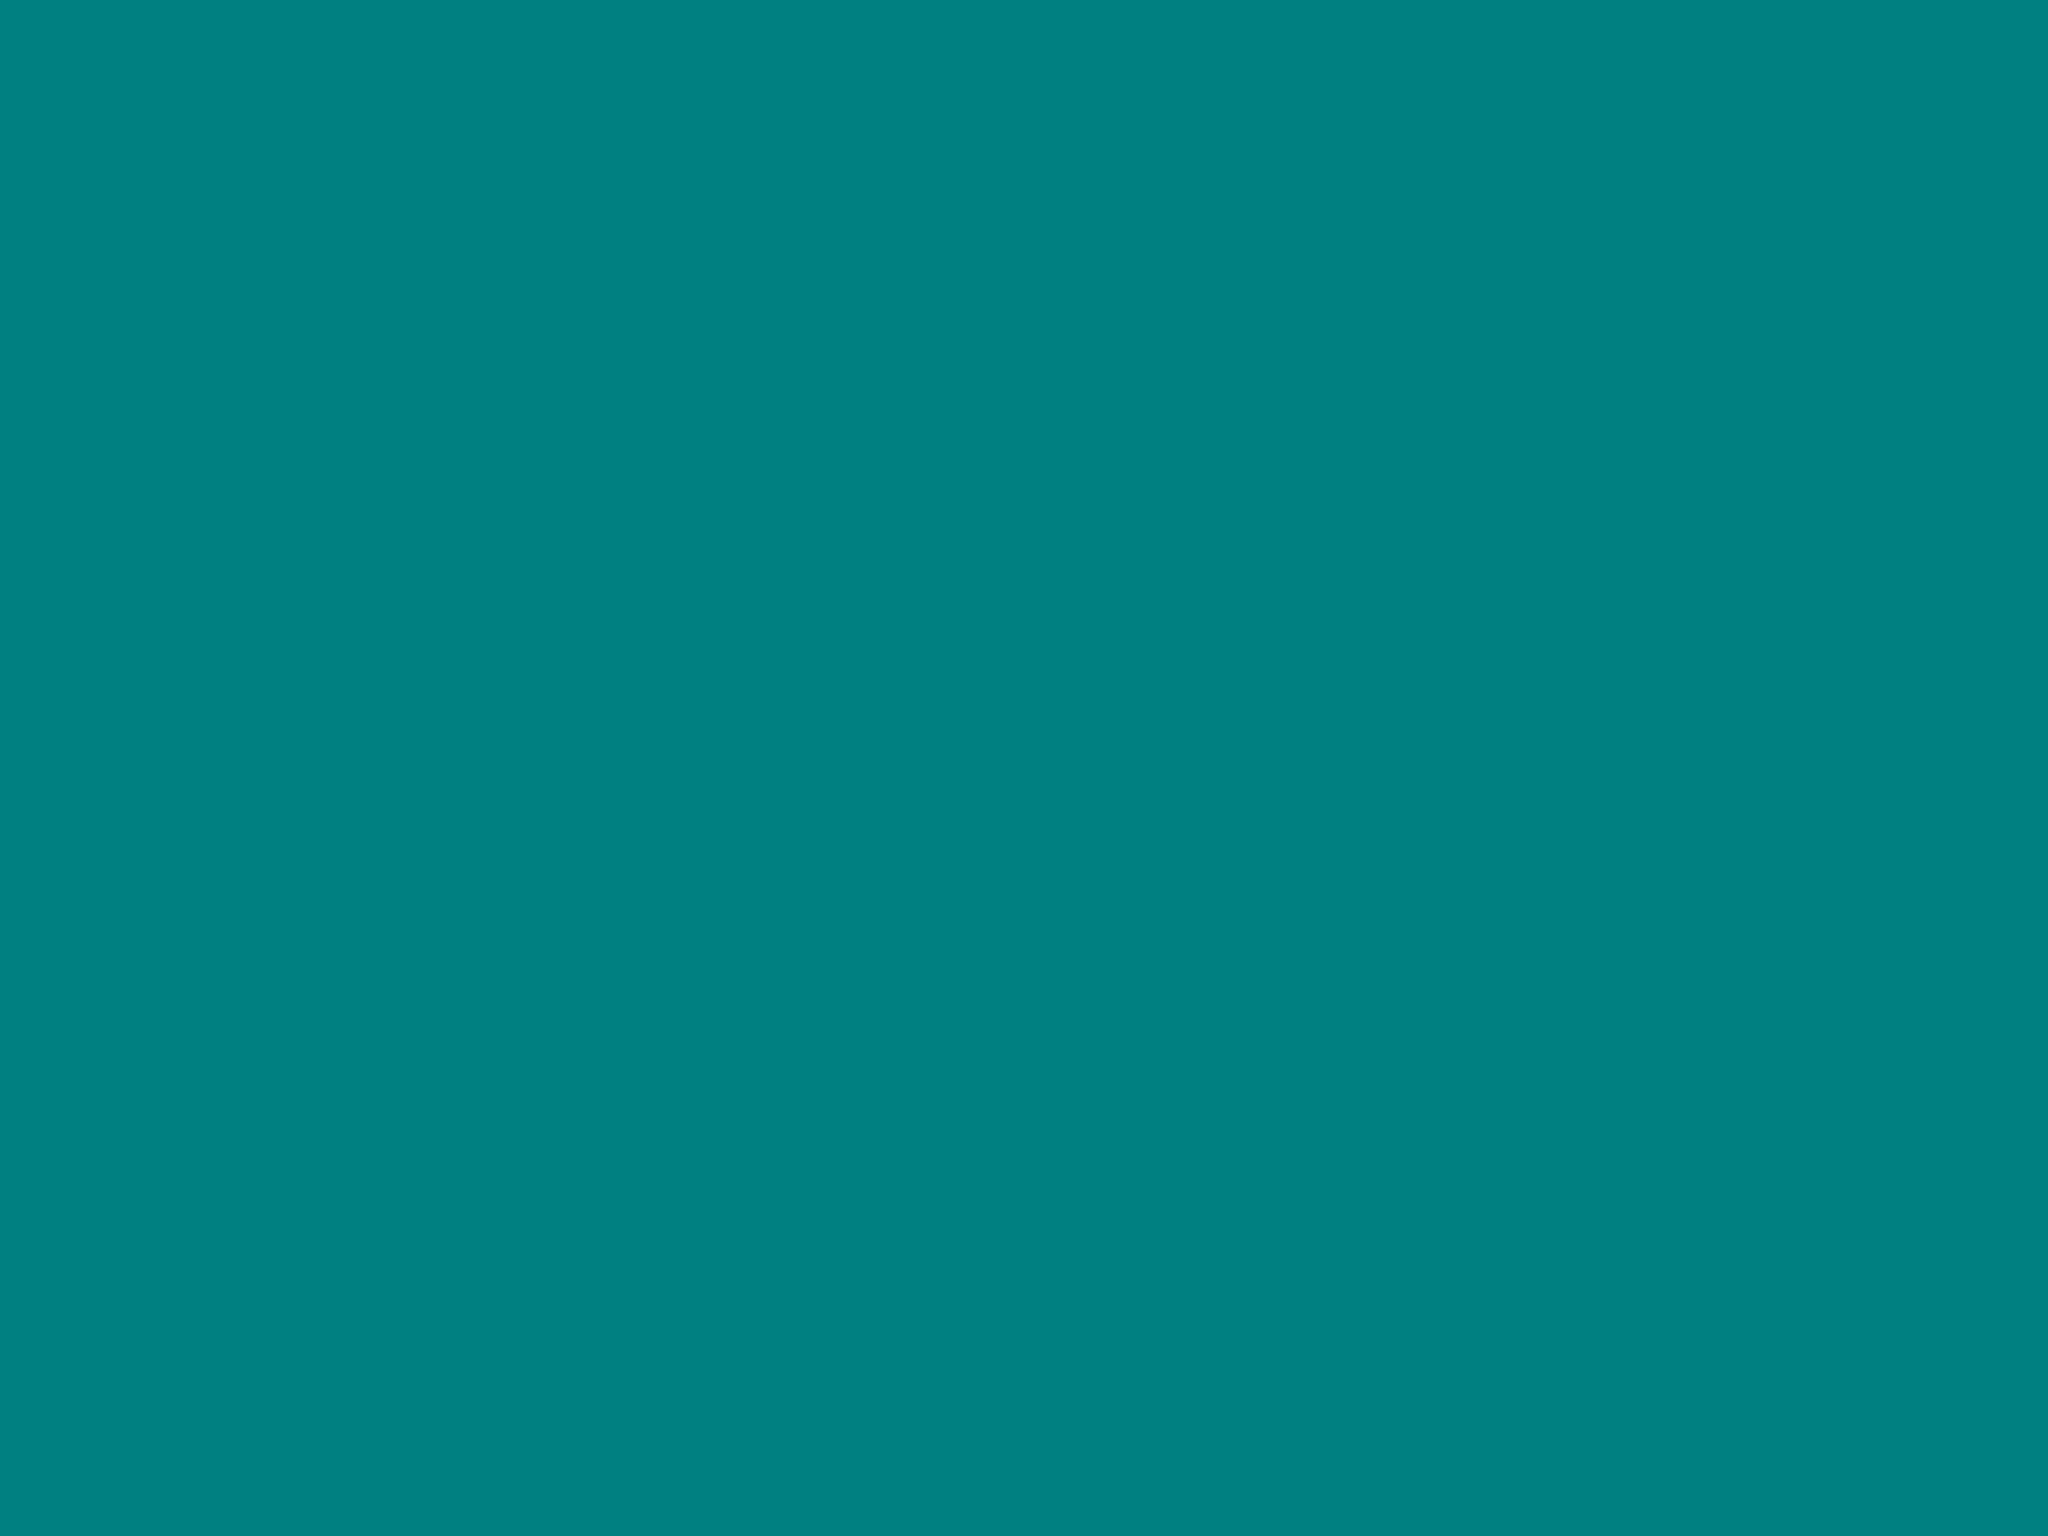 2048x1536 Teal Solid Color Background